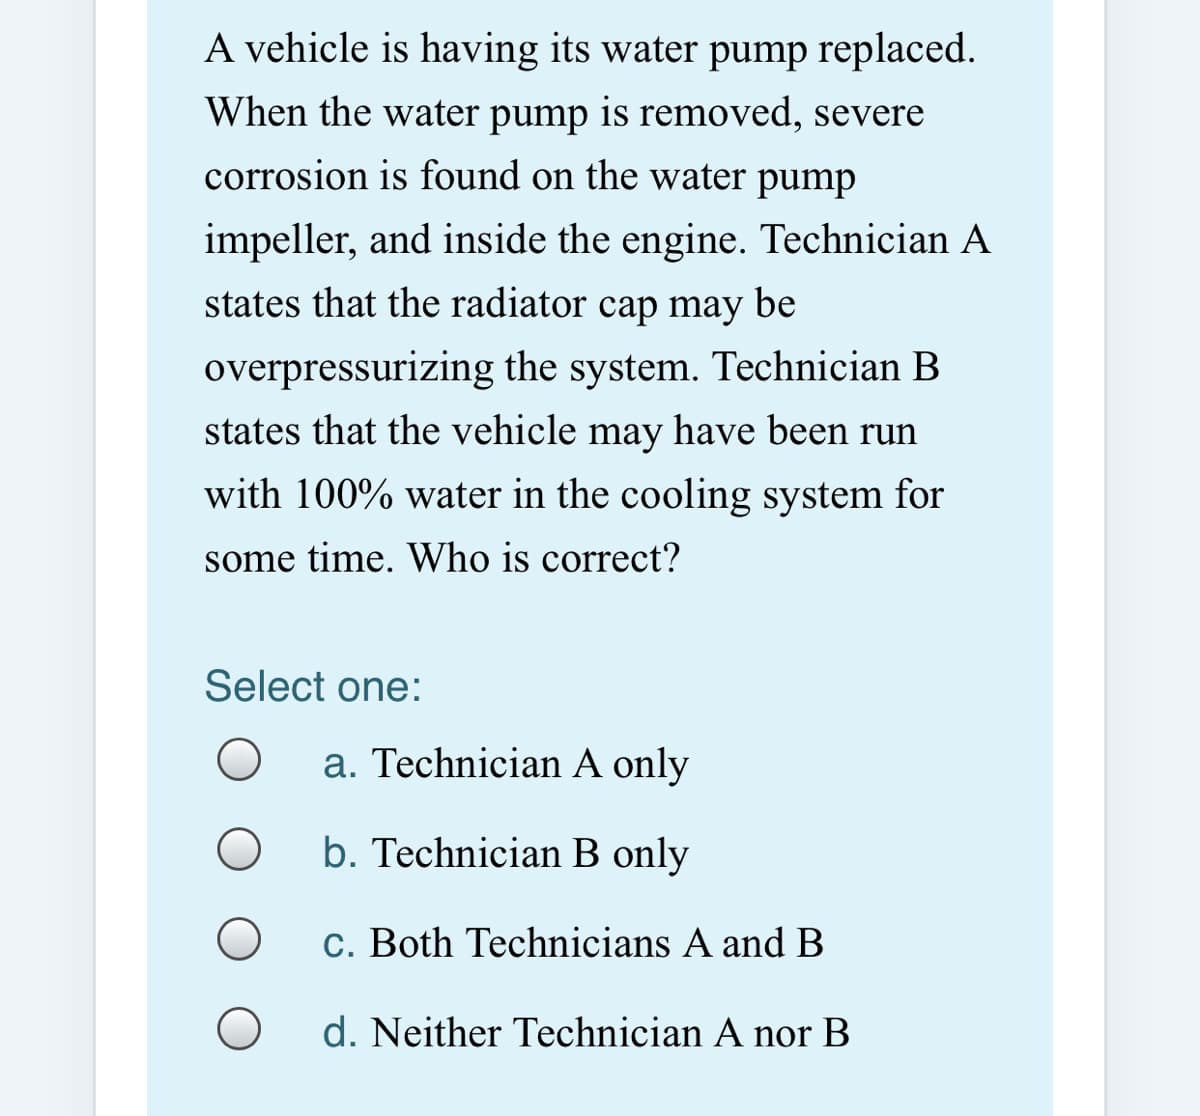 A vehicle is having its water pump replaced.
When the water pump is removed, severe
corrosion is found on the water pump
impeller, and inside the engine. Technician A
states that the radiator cap may be
overpressurizing the system. Technician B
states that the vehicle may have been run
with 100% water in the cooling system for
some time. Who is correct?
Select one:
a. Technician A only
b. Technician B only
c. Both Technicians A and B
d. Neither Technician A nor B
